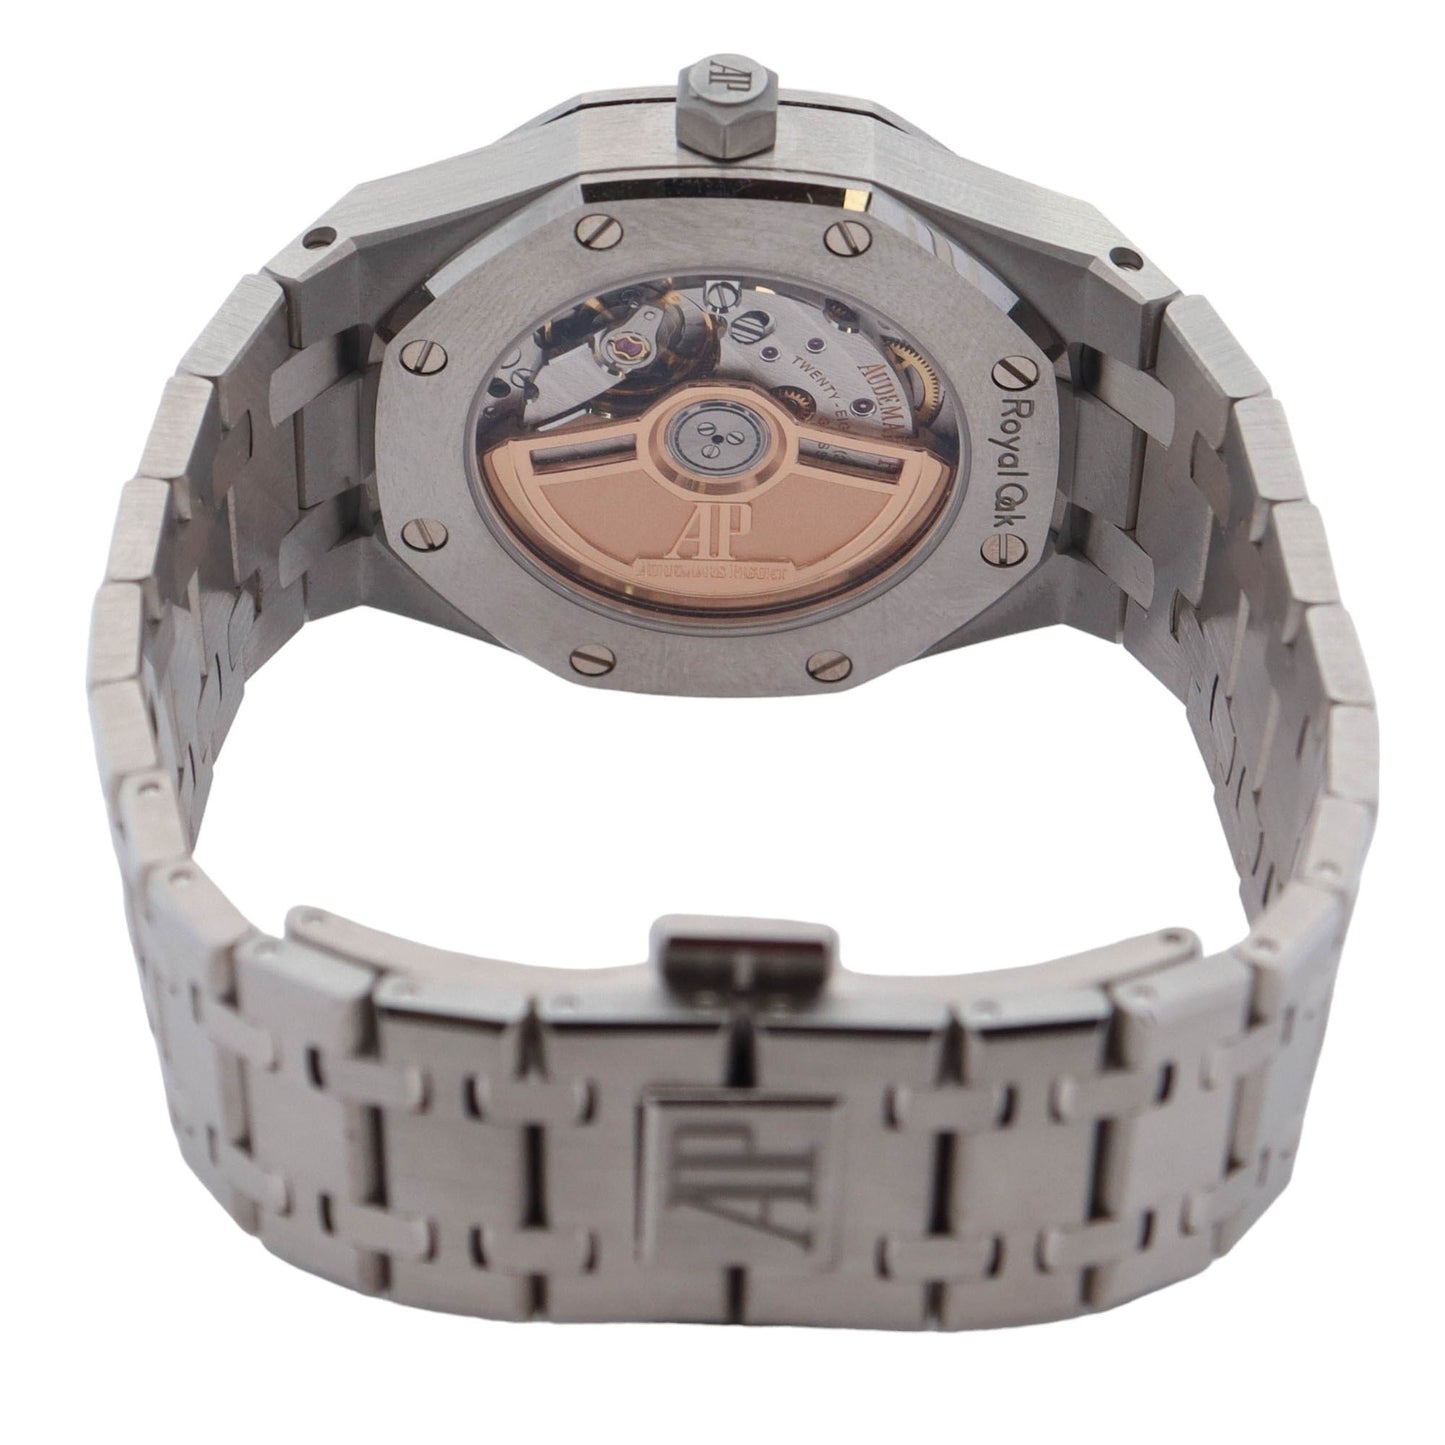 Audemars Piguet Royal Oak Stainless Steel 34mm White Stick Dial Watch Reference# 77450ST.OO.1361ST.02